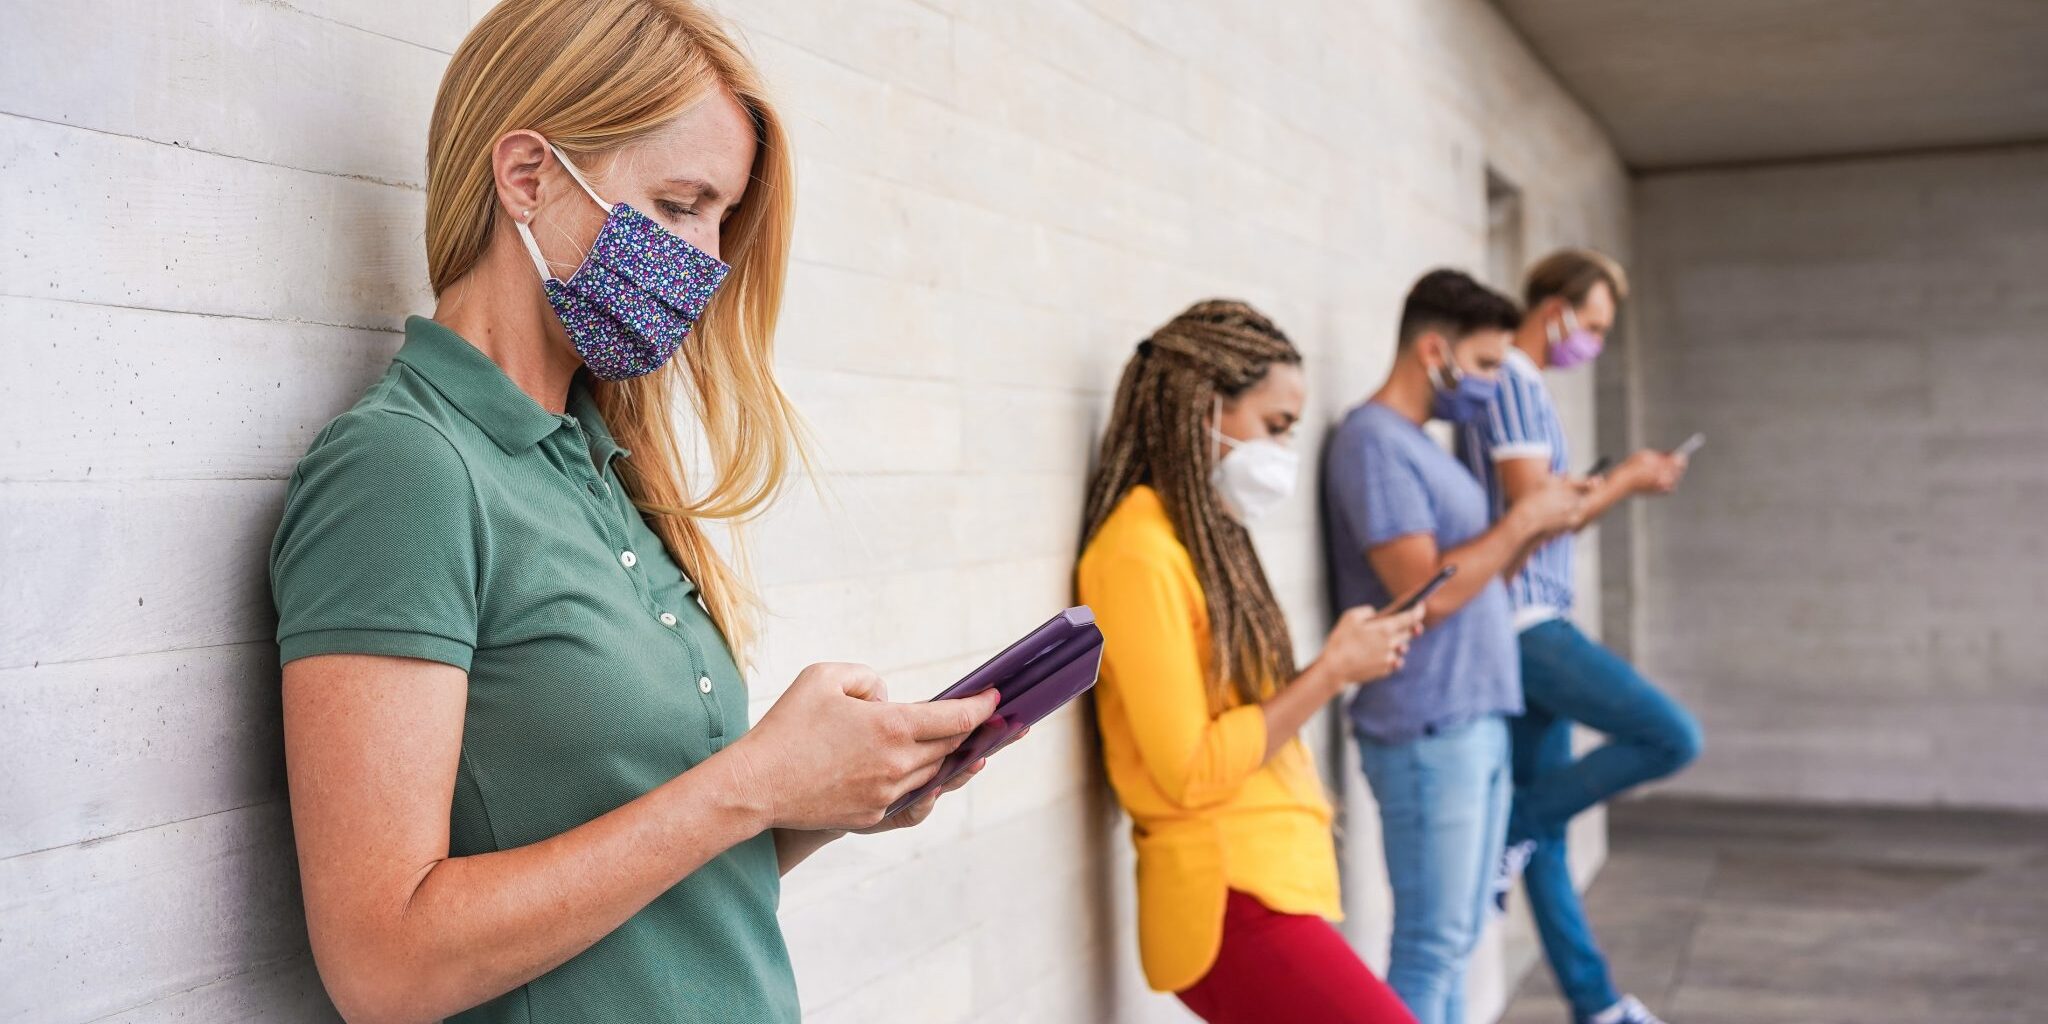 Young people wearing face safety masks using smart mobile phones while keeping social distance during coronavirus time - Technology and covid-19 spread prevention concept - Focus on blond girl hand